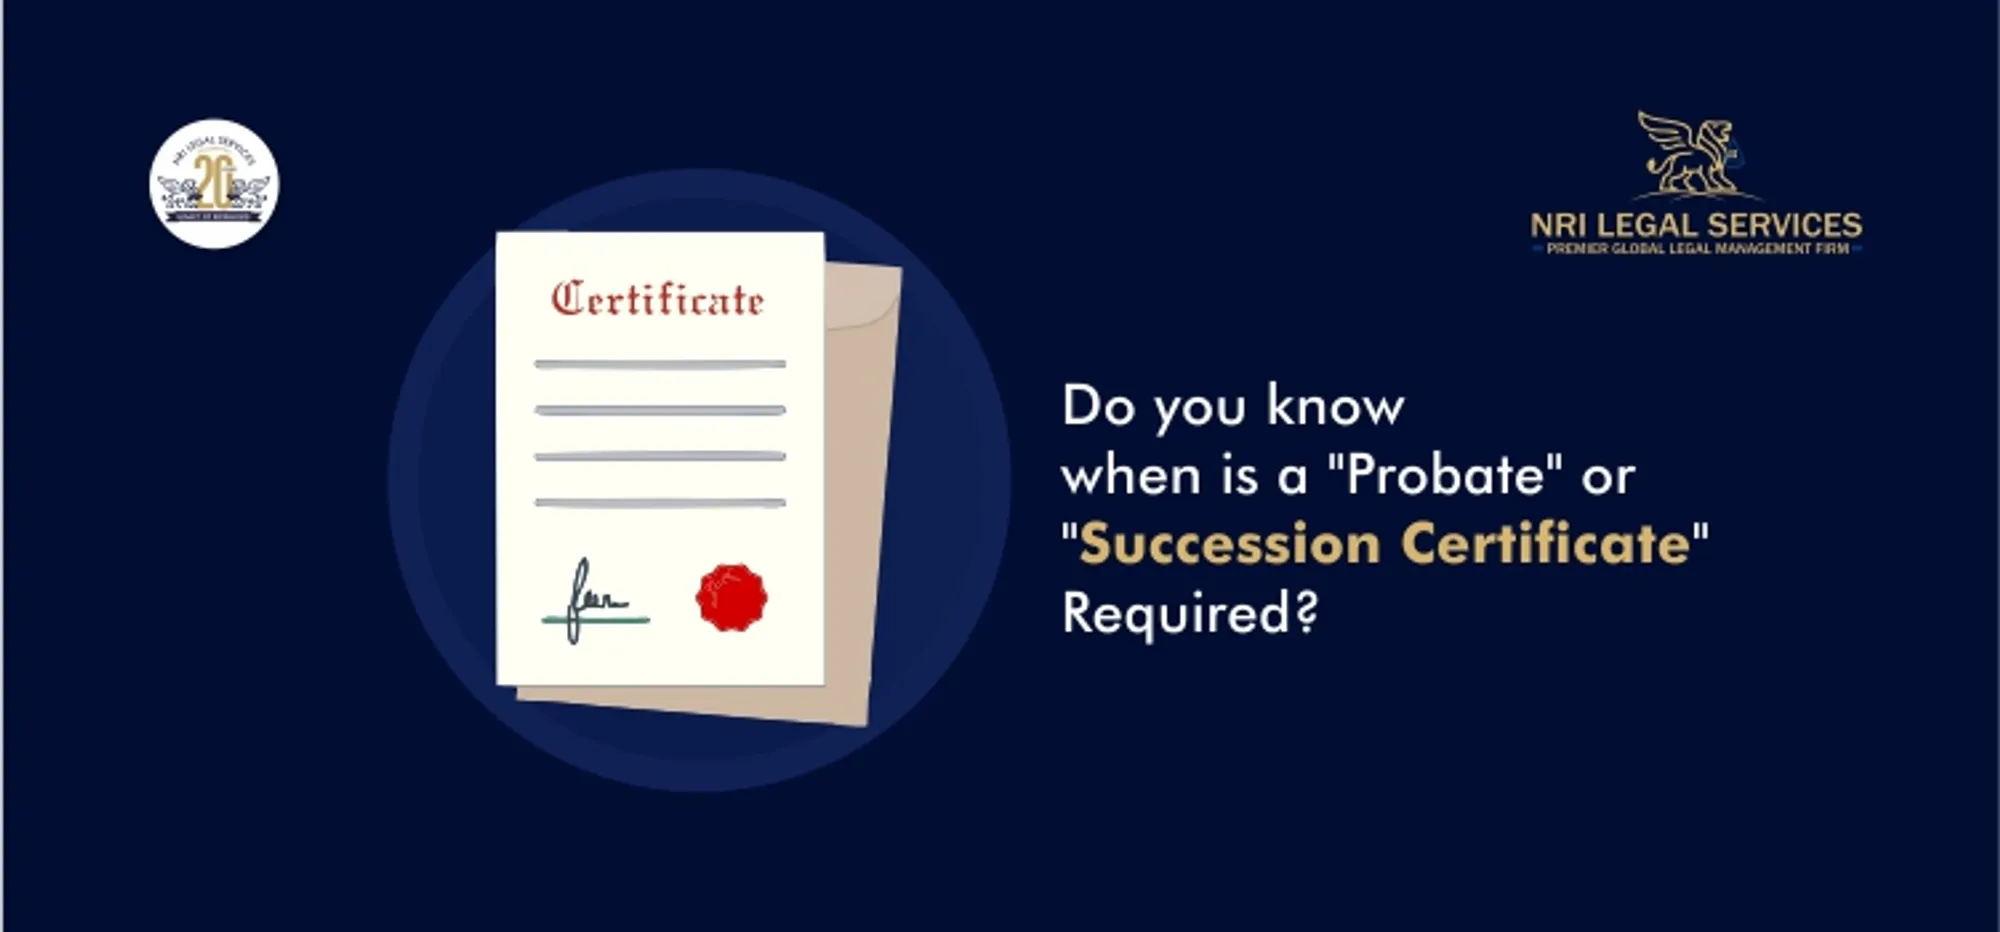 Do you know when is a Probate or Succession Certificate Required